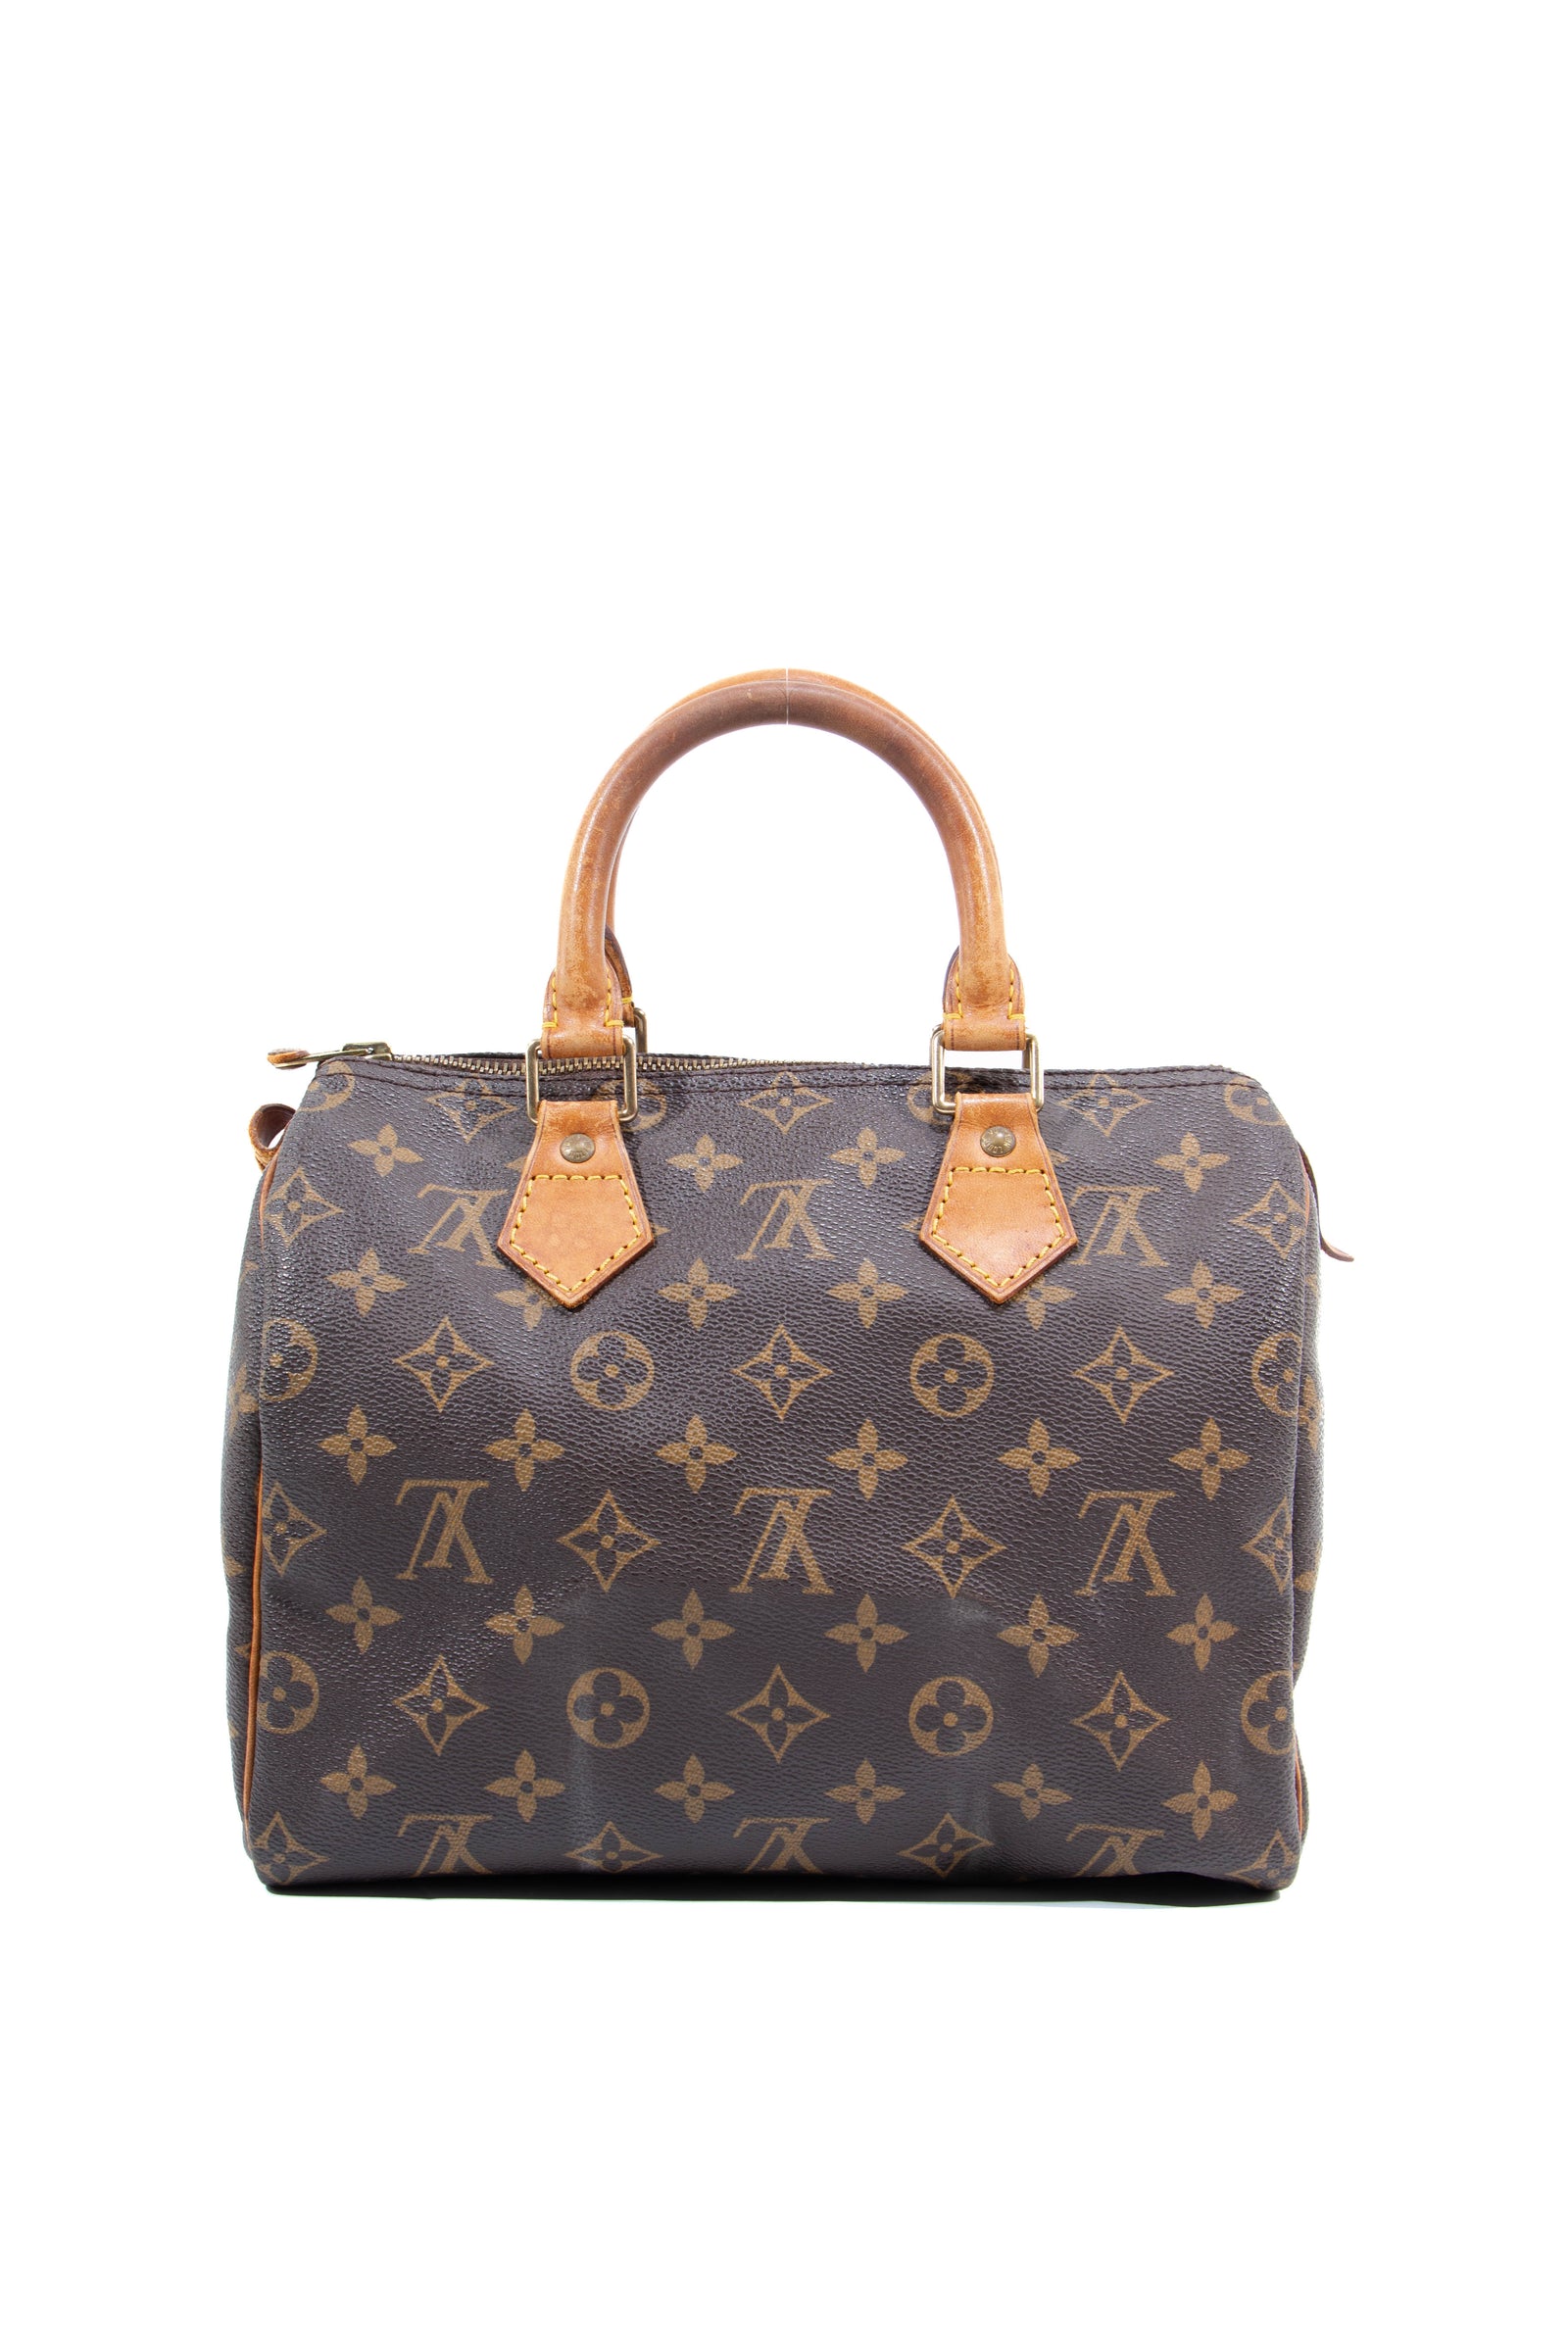 Authentic Louis Vuitton Bags, Shoes, and Accessories Tagged soufflat -  The Purse Ladies